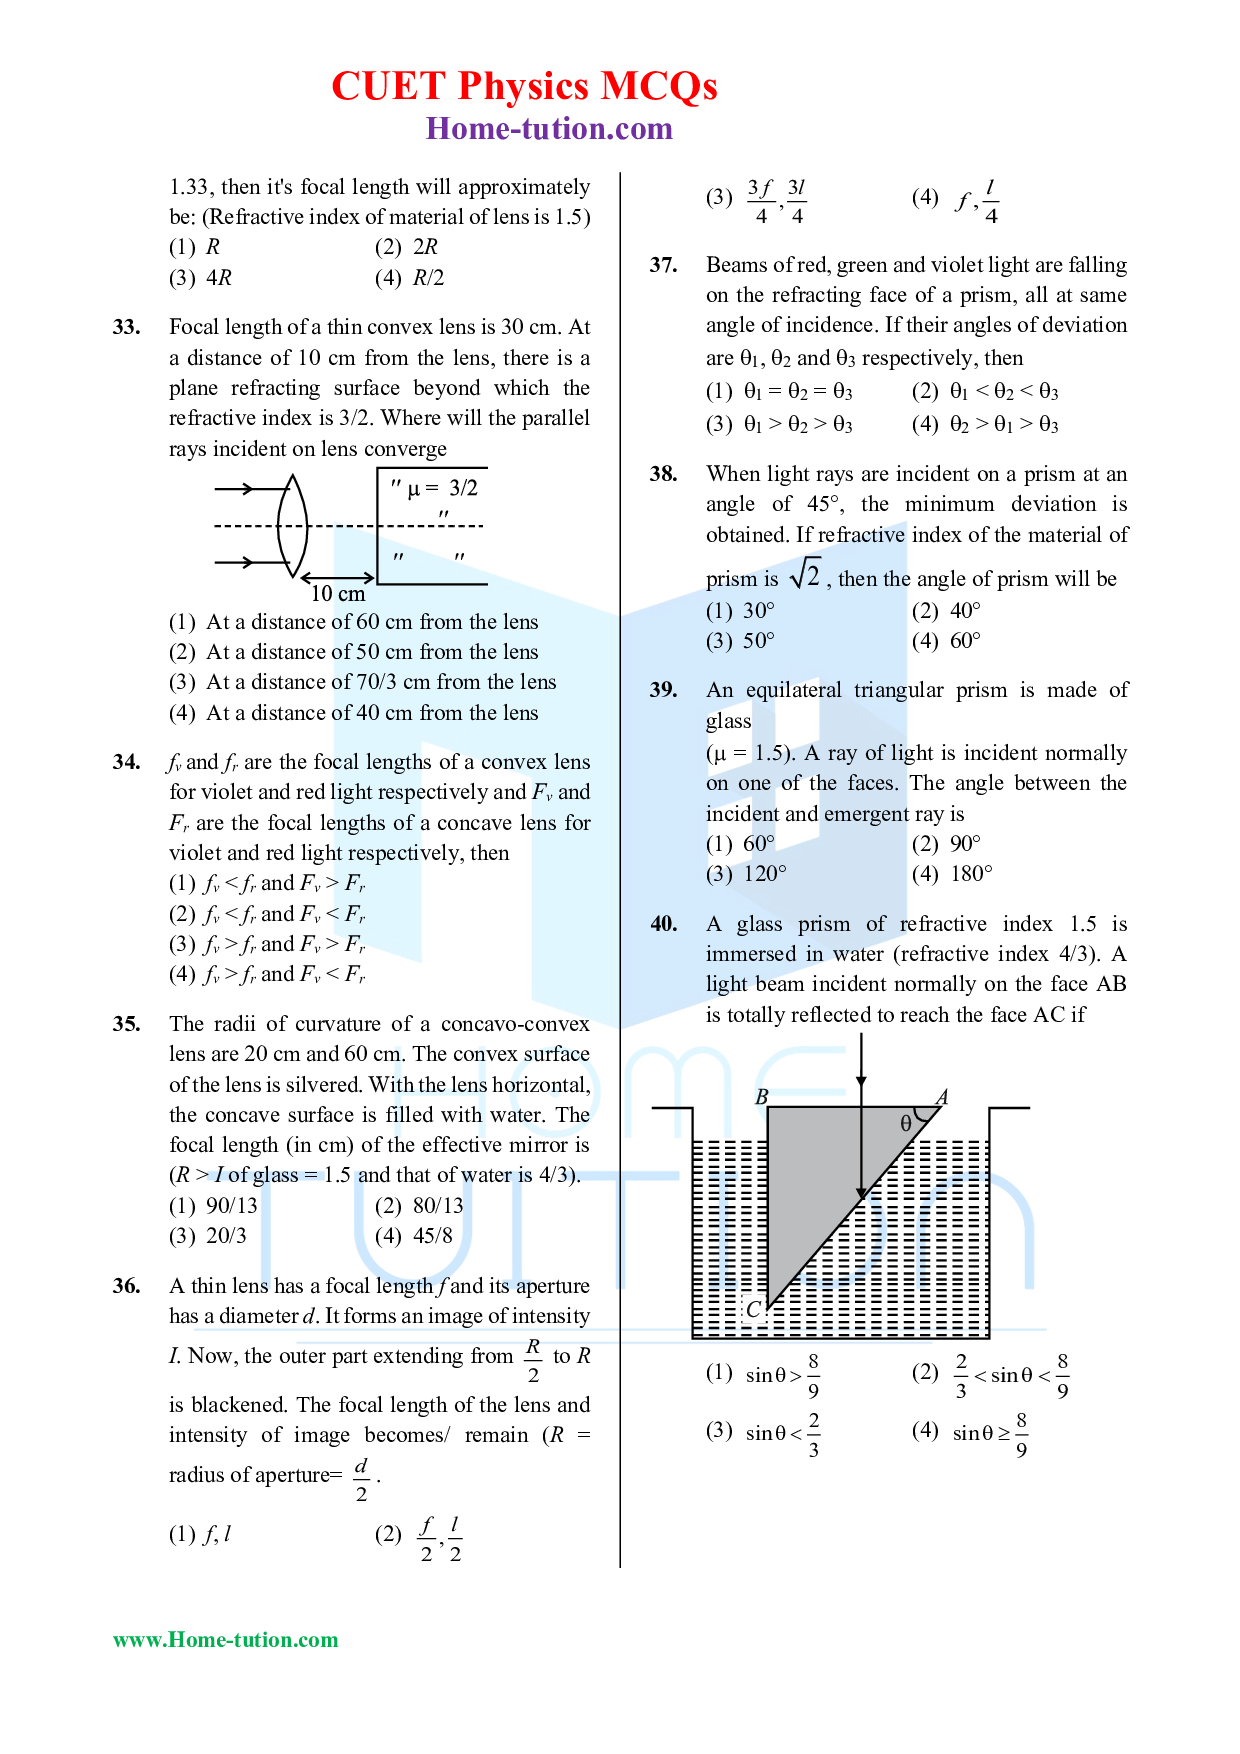 CUET MCQ Questions For Physics Chapter-09 Ray Optics